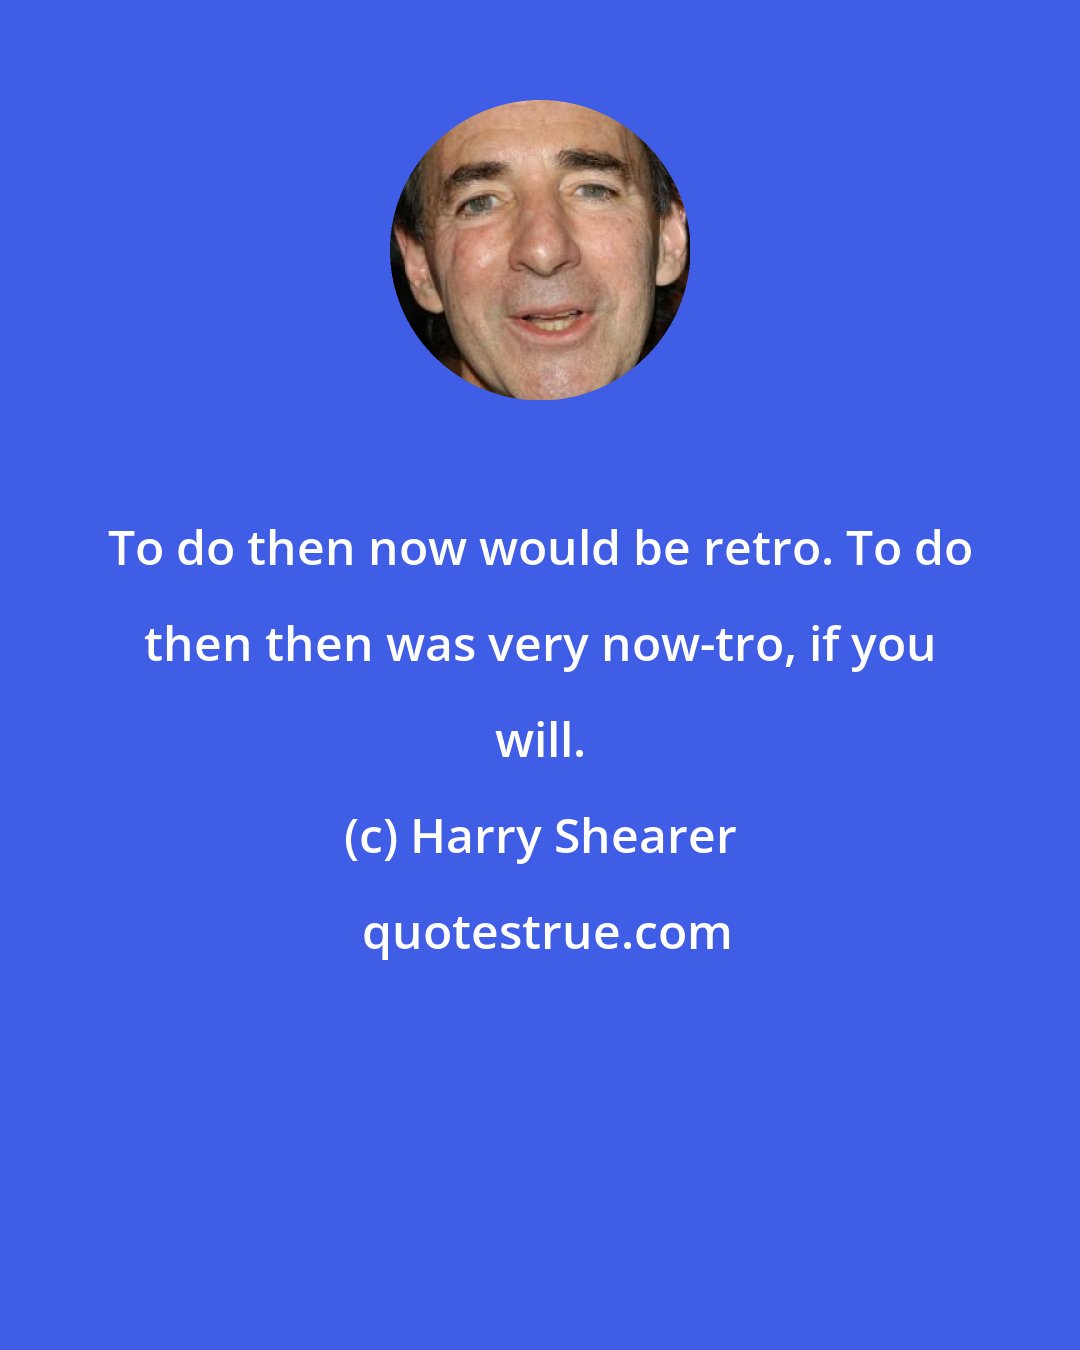 Harry Shearer: To do then now would be retro. To do then then was very now-tro, if you will.